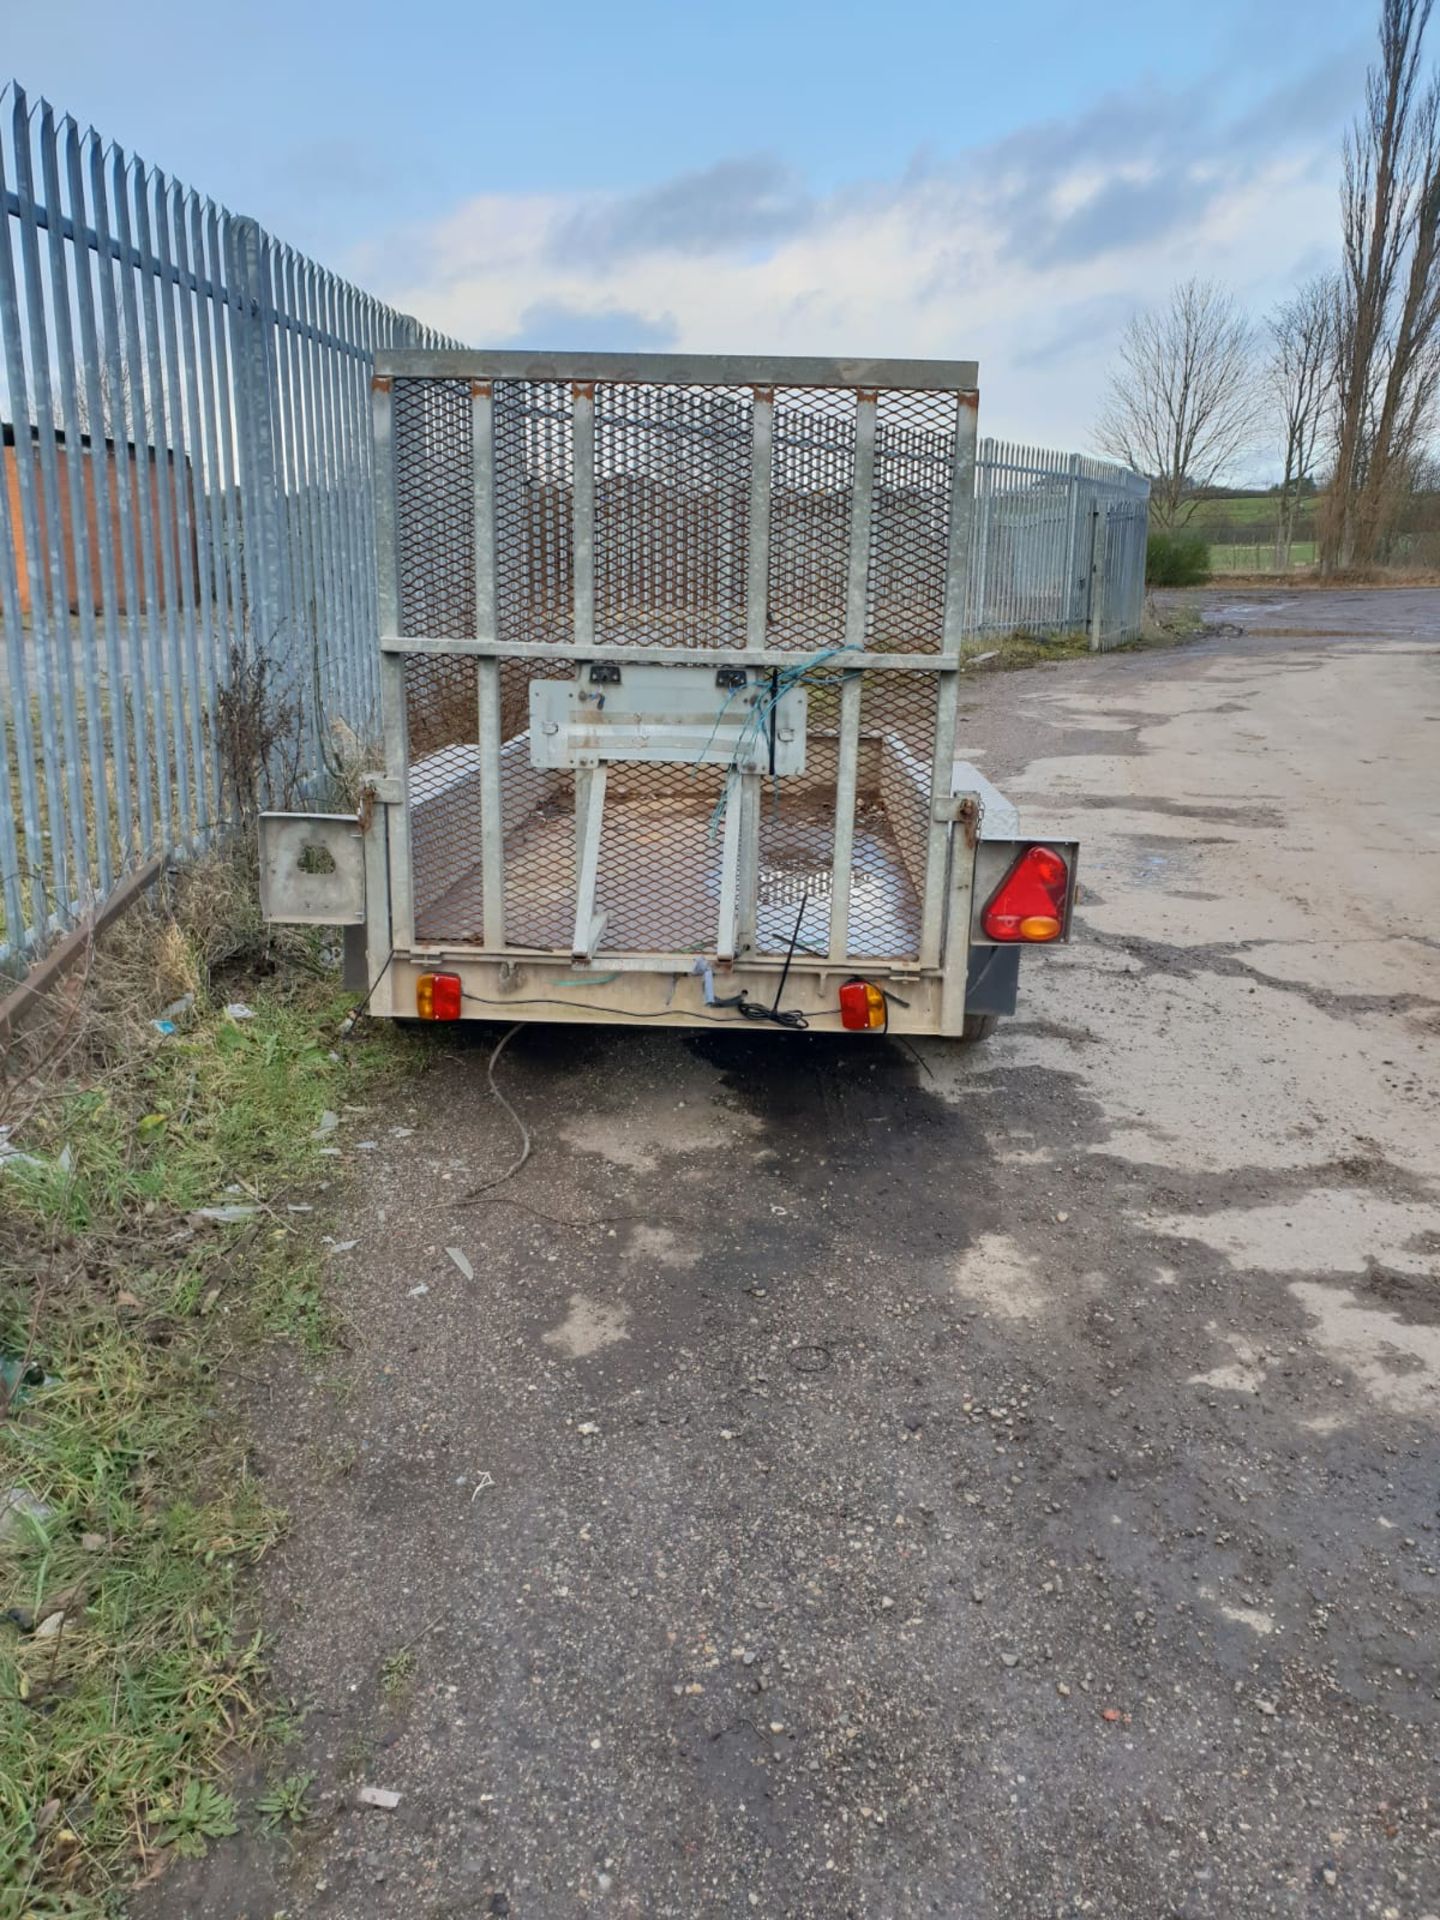 INDESPENSION TWIN AXLE MINI DIGGER PLANT TRAILER GOOD CONDITION SOLID FLOOR, GOOD TYRES *NO VAT* - Image 2 of 7